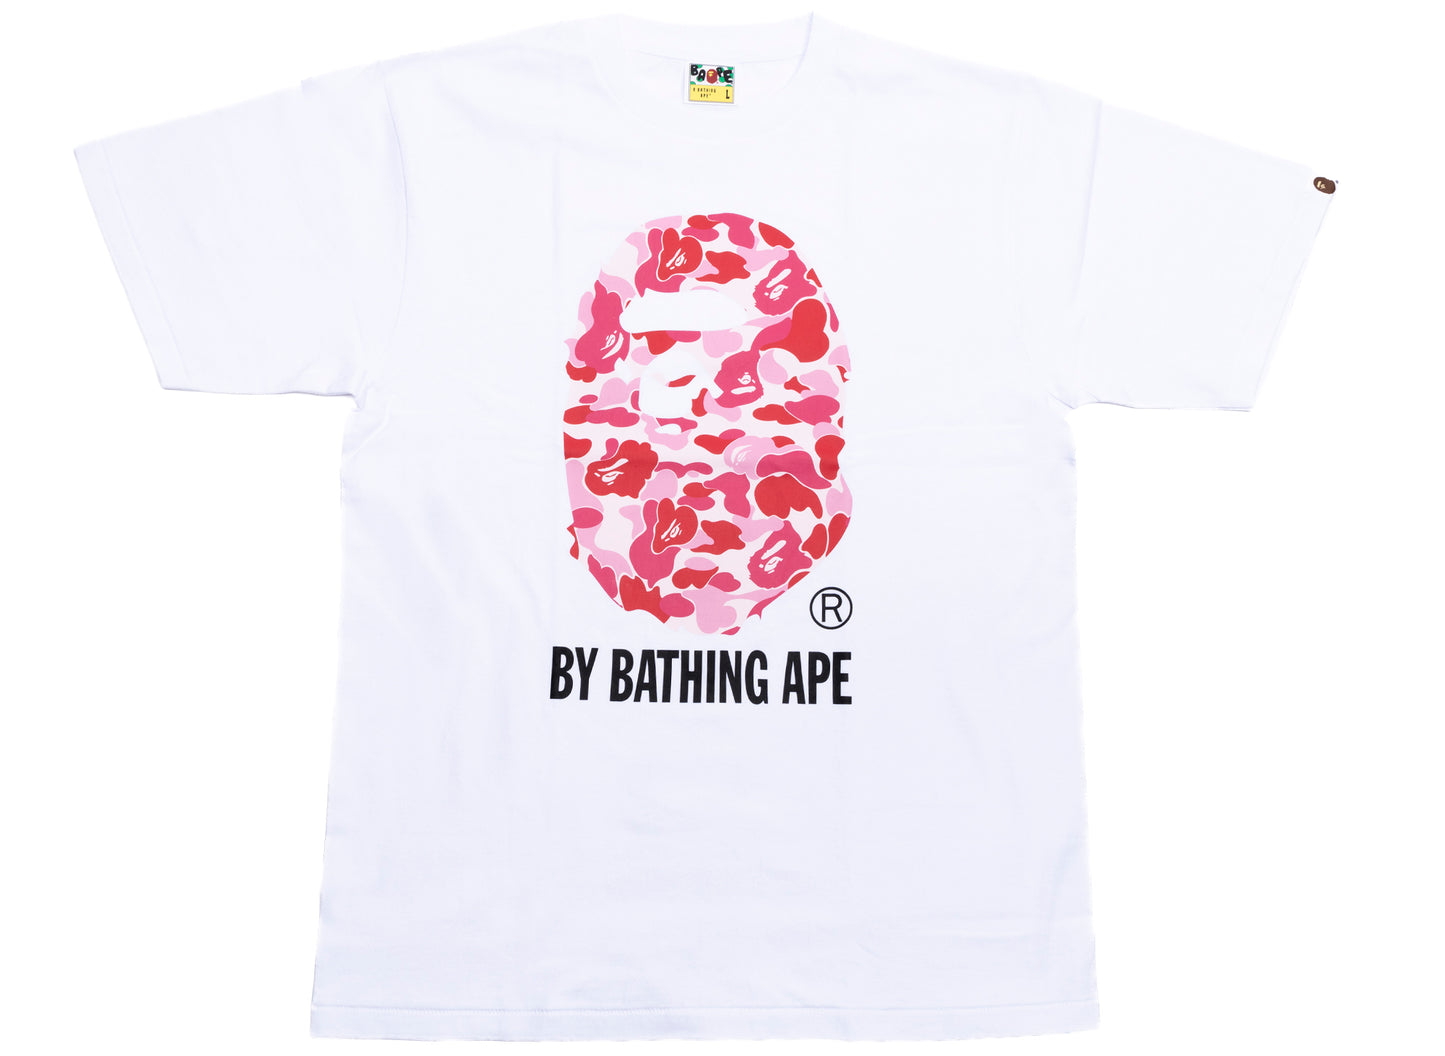 A Bathing Ape ABC Camo by Bathing Ape Tee in White/Pink